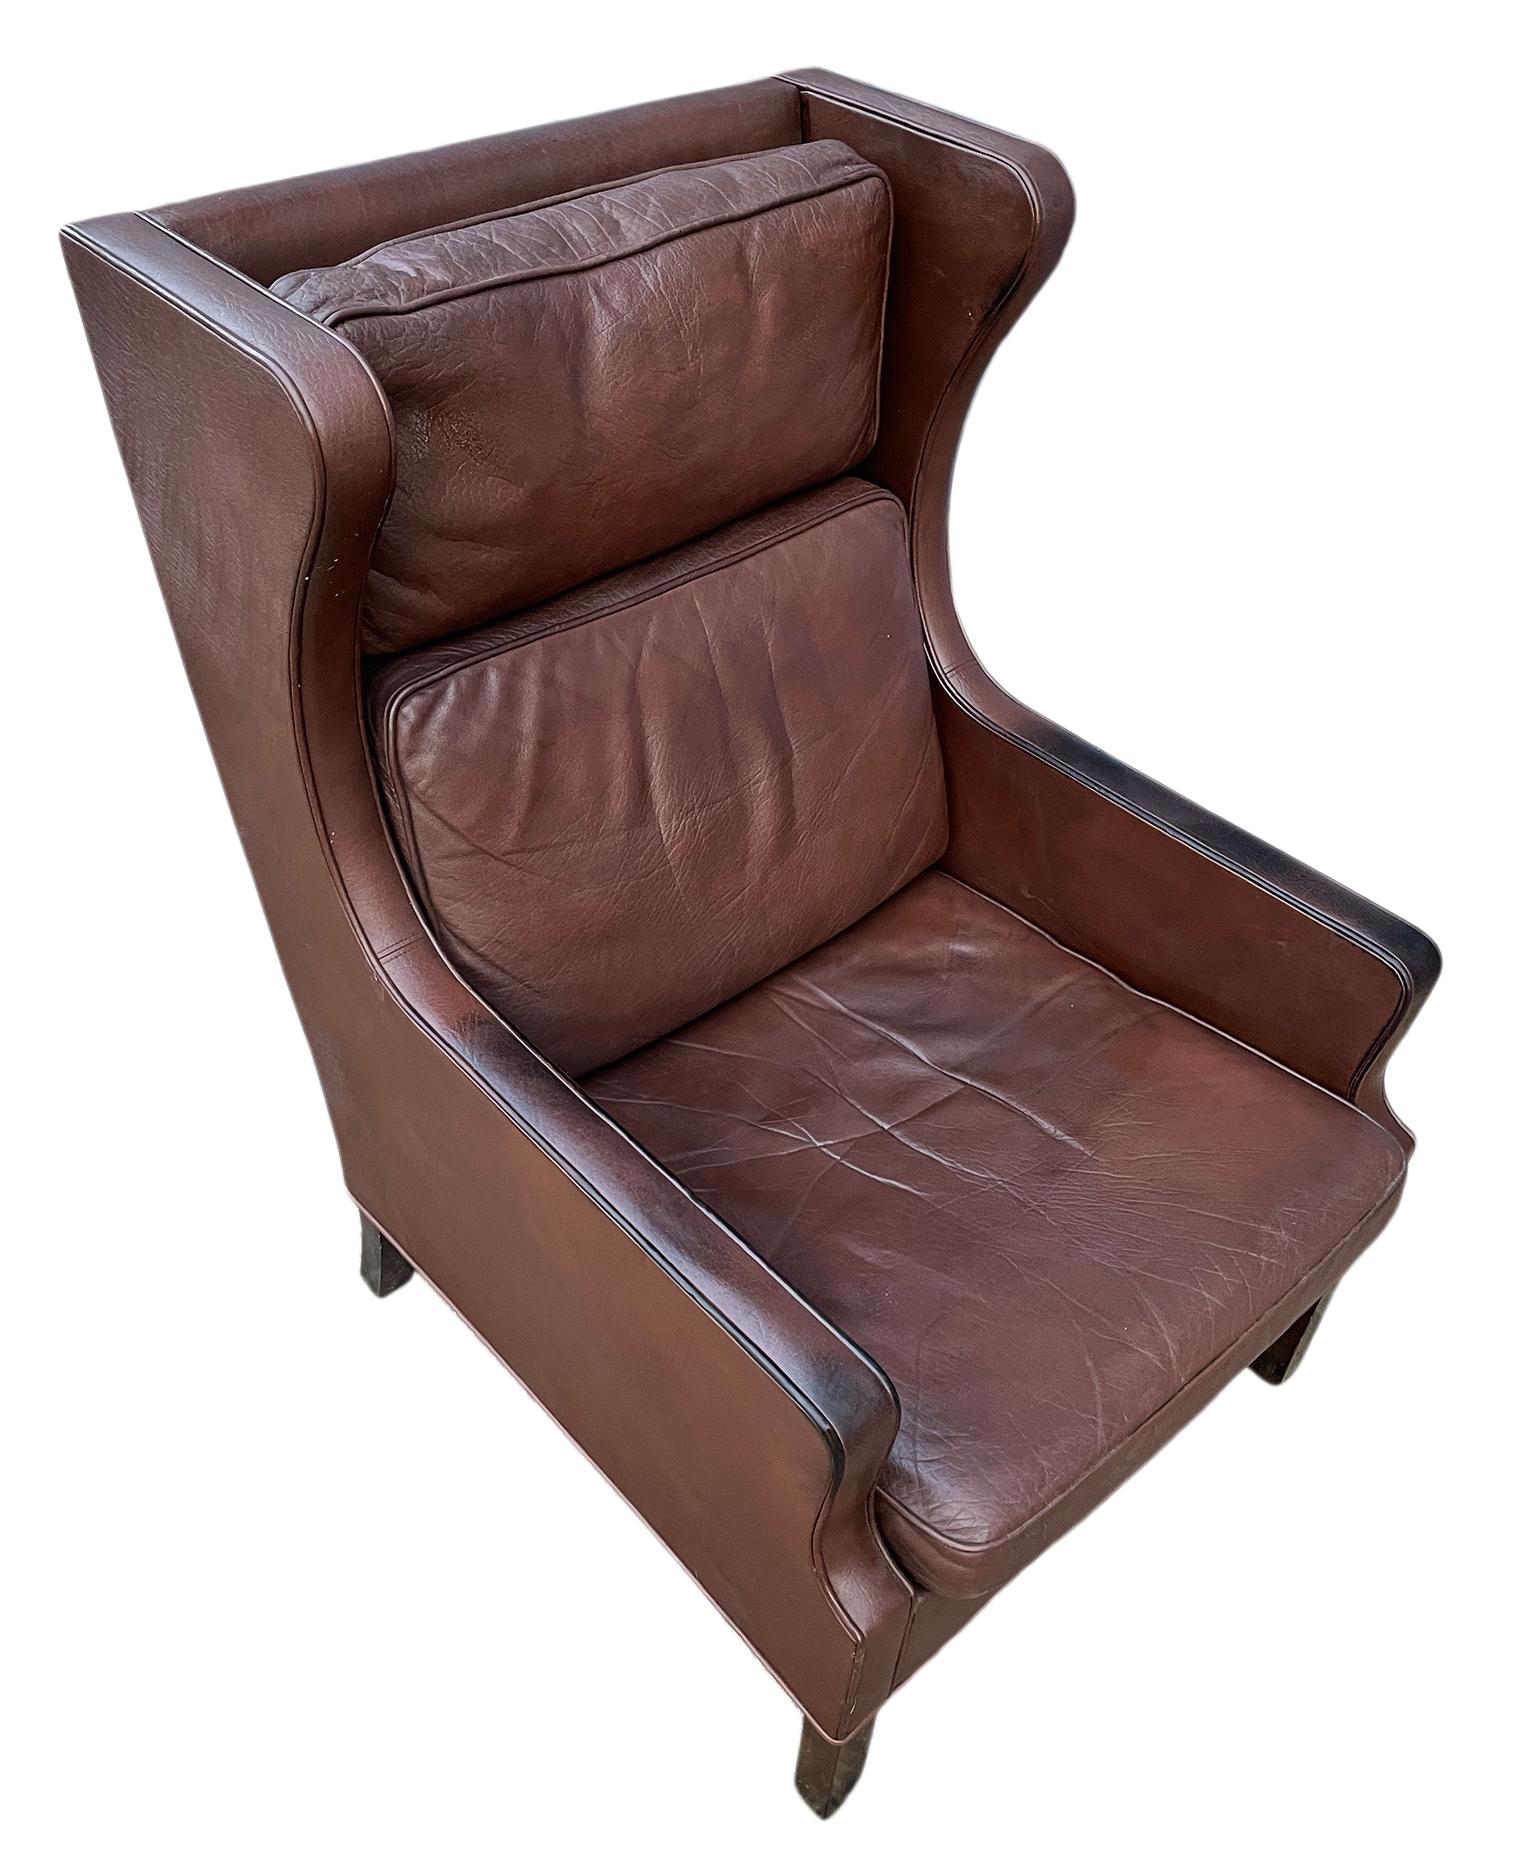 Mid century Danish modern wing back Brown leather fireside chair in the by Børge Mogensen with beautiful patina. Chair shows wear and use. All original vintage used patina. Beautiful soft Dark Brown leather. Solid Teak legs - Made In Denmark.